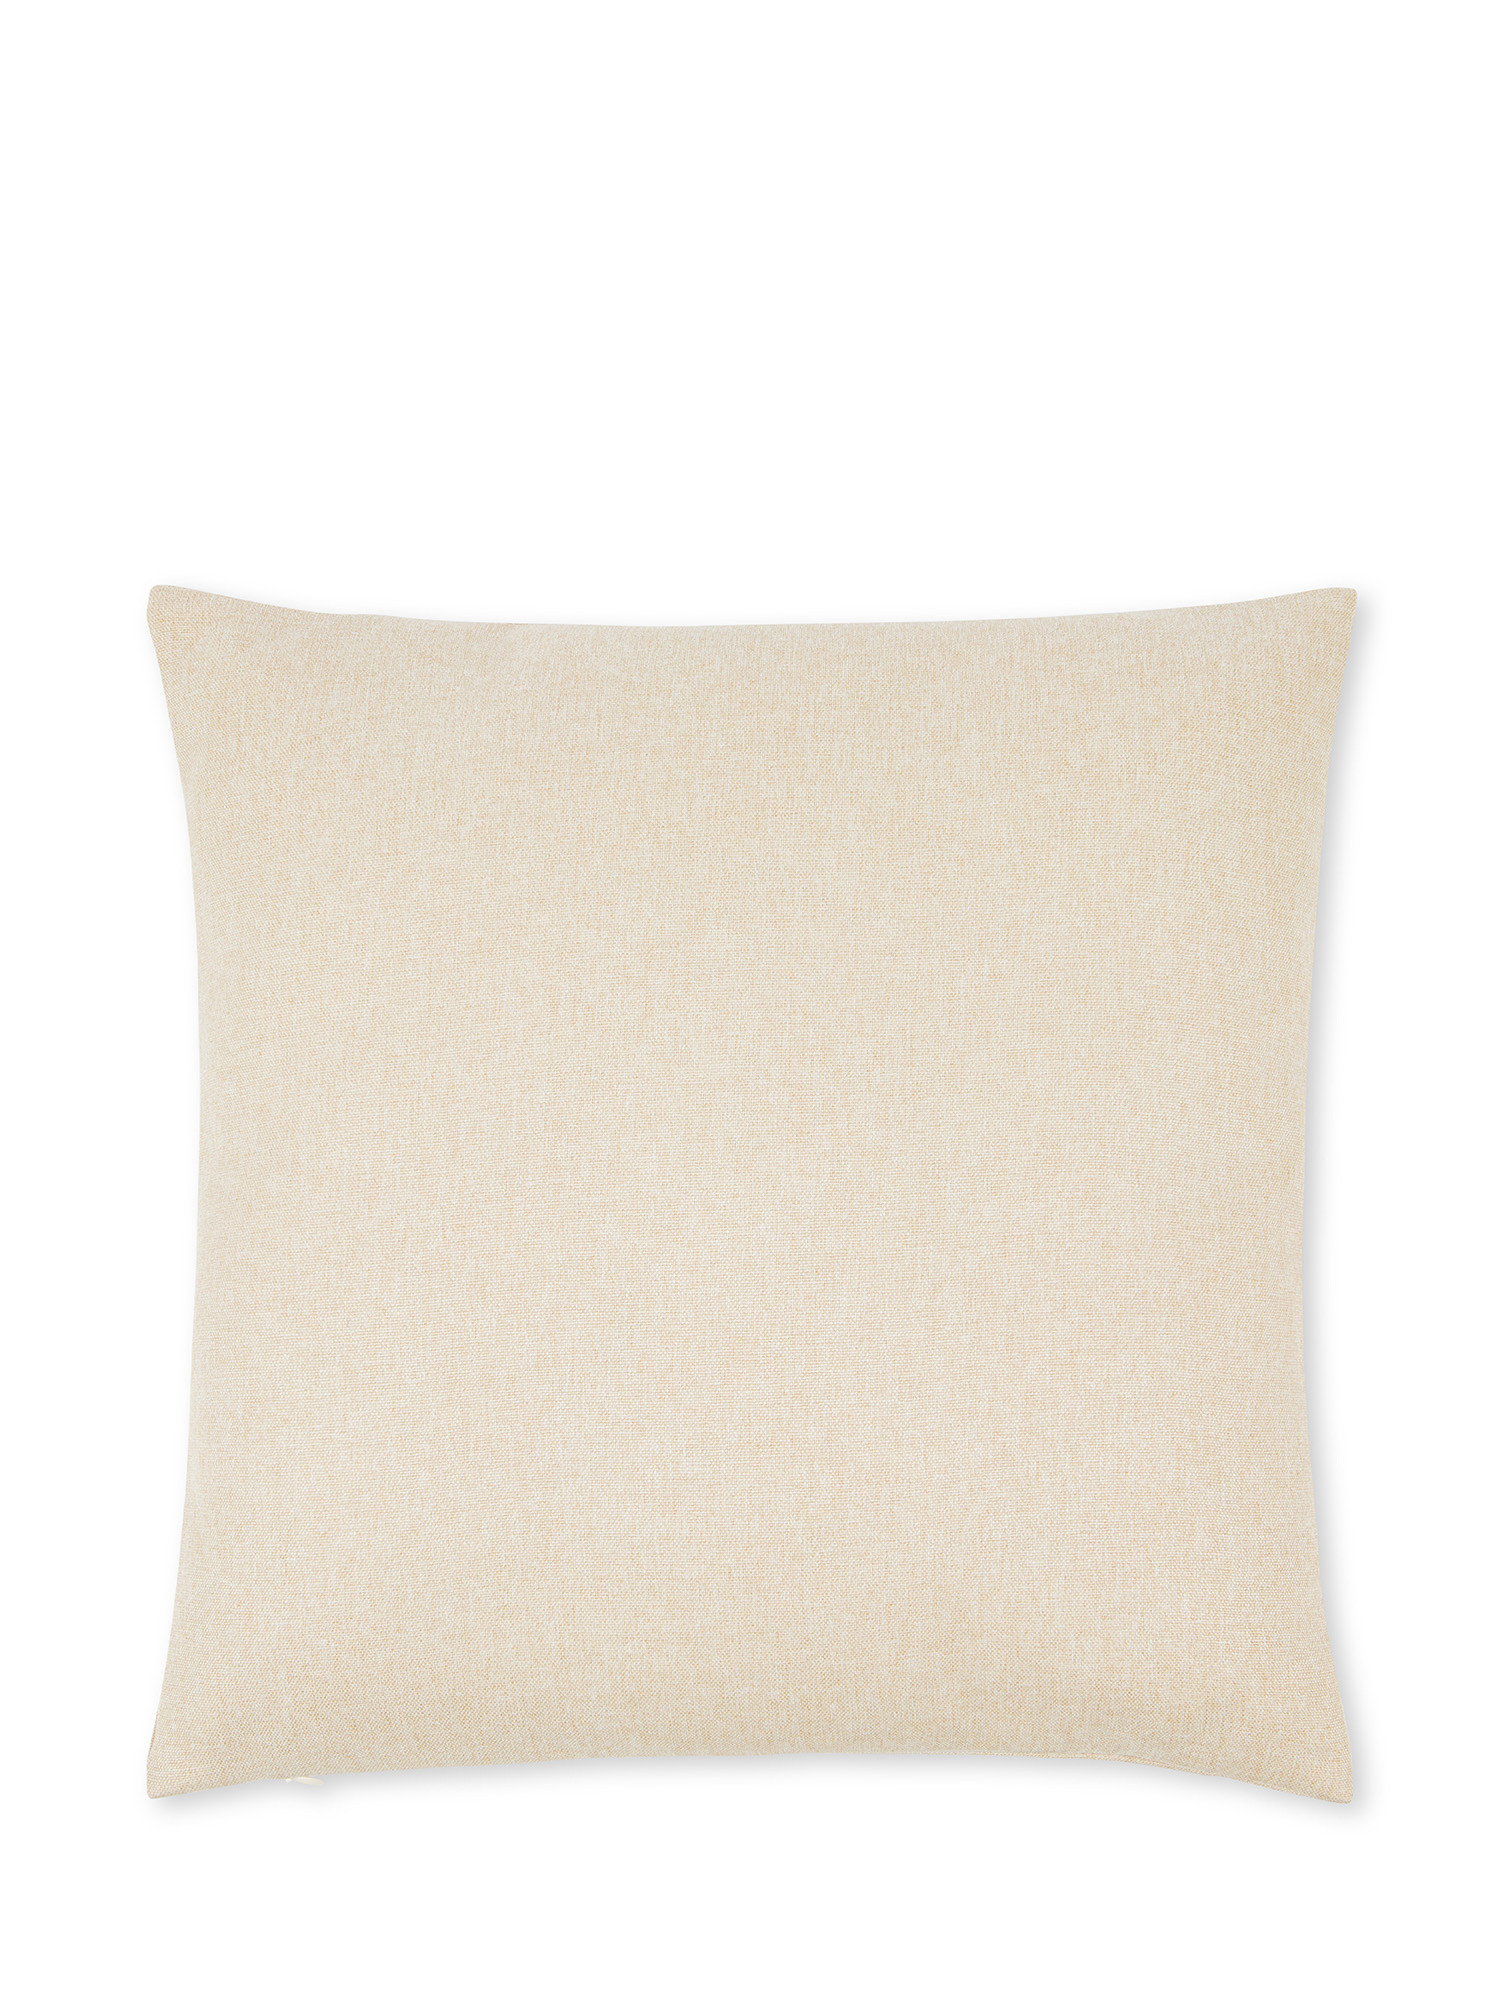 Teddy fabric cushion with embroidery 45x45cm, Beige, large image number 1